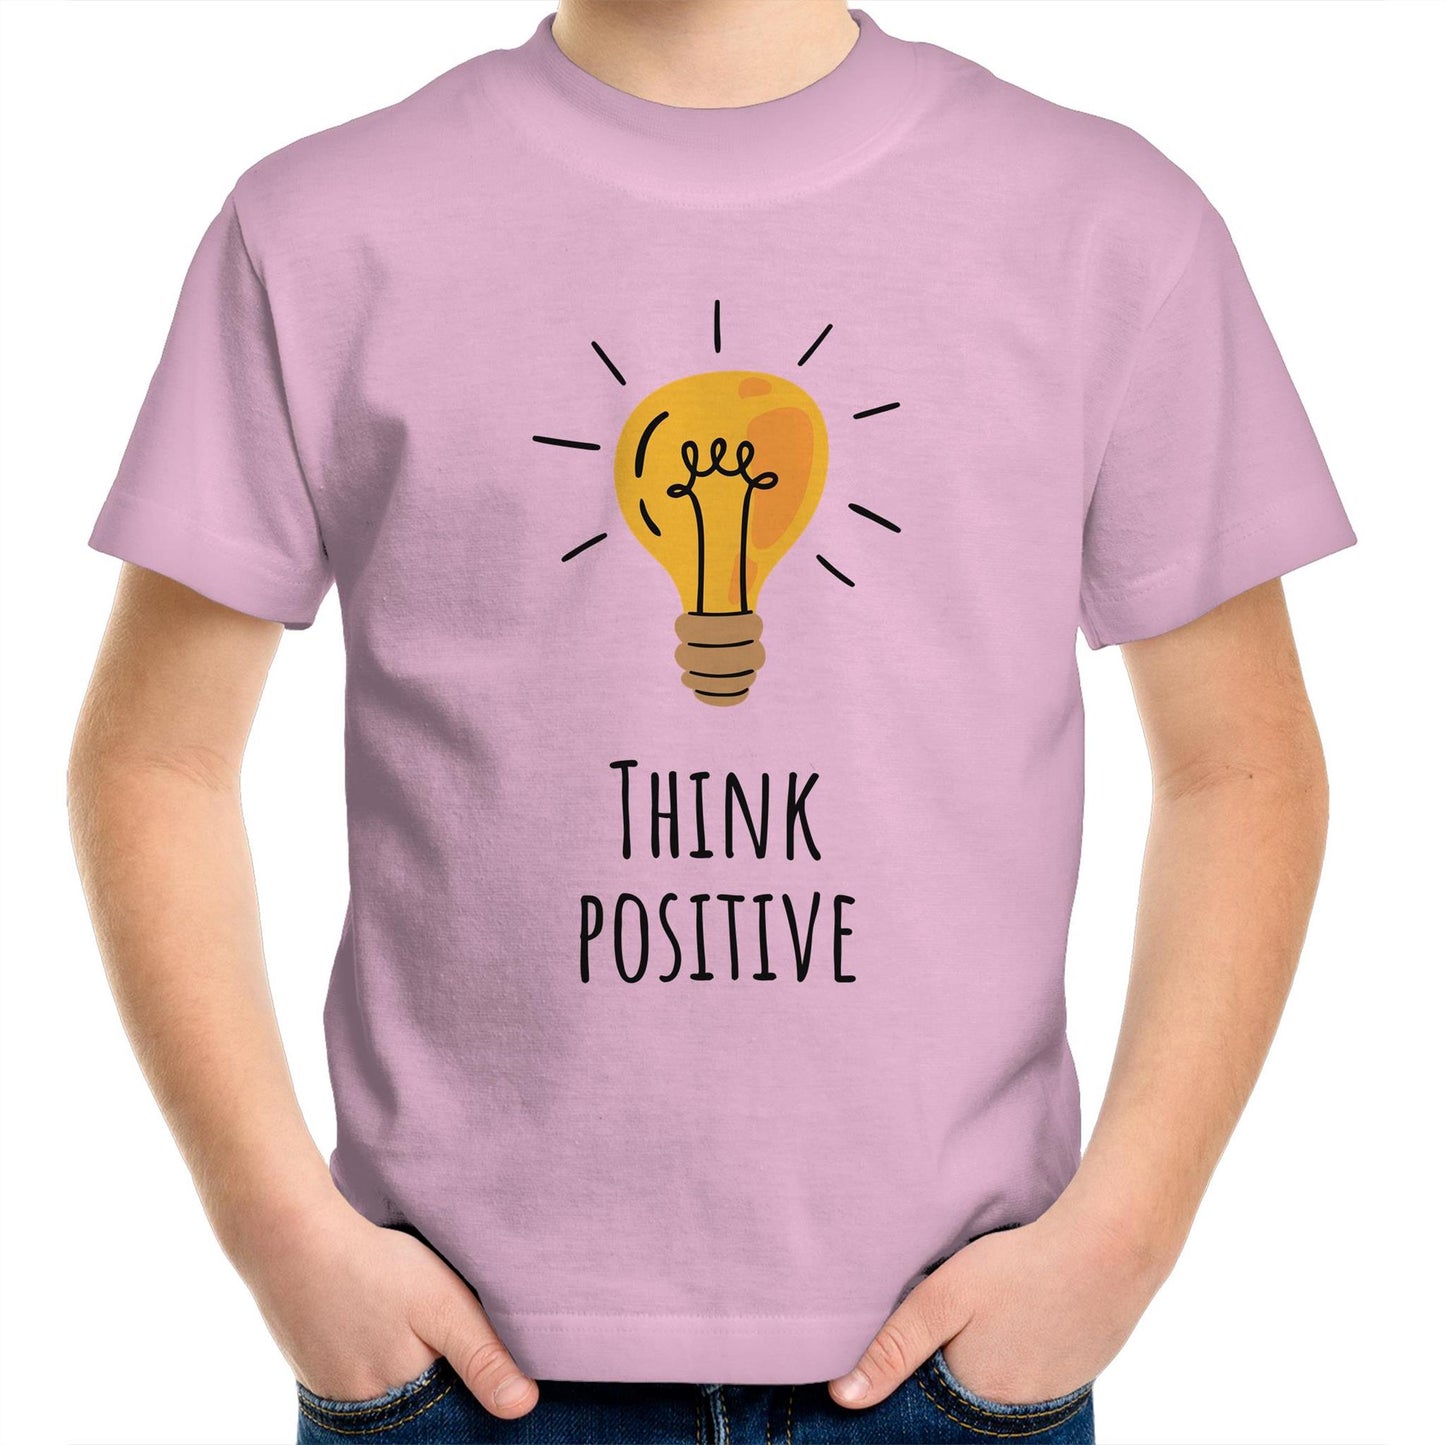 Think Positive - Kids Youth Crew T-Shirt Pink Kids Youth T-shirt